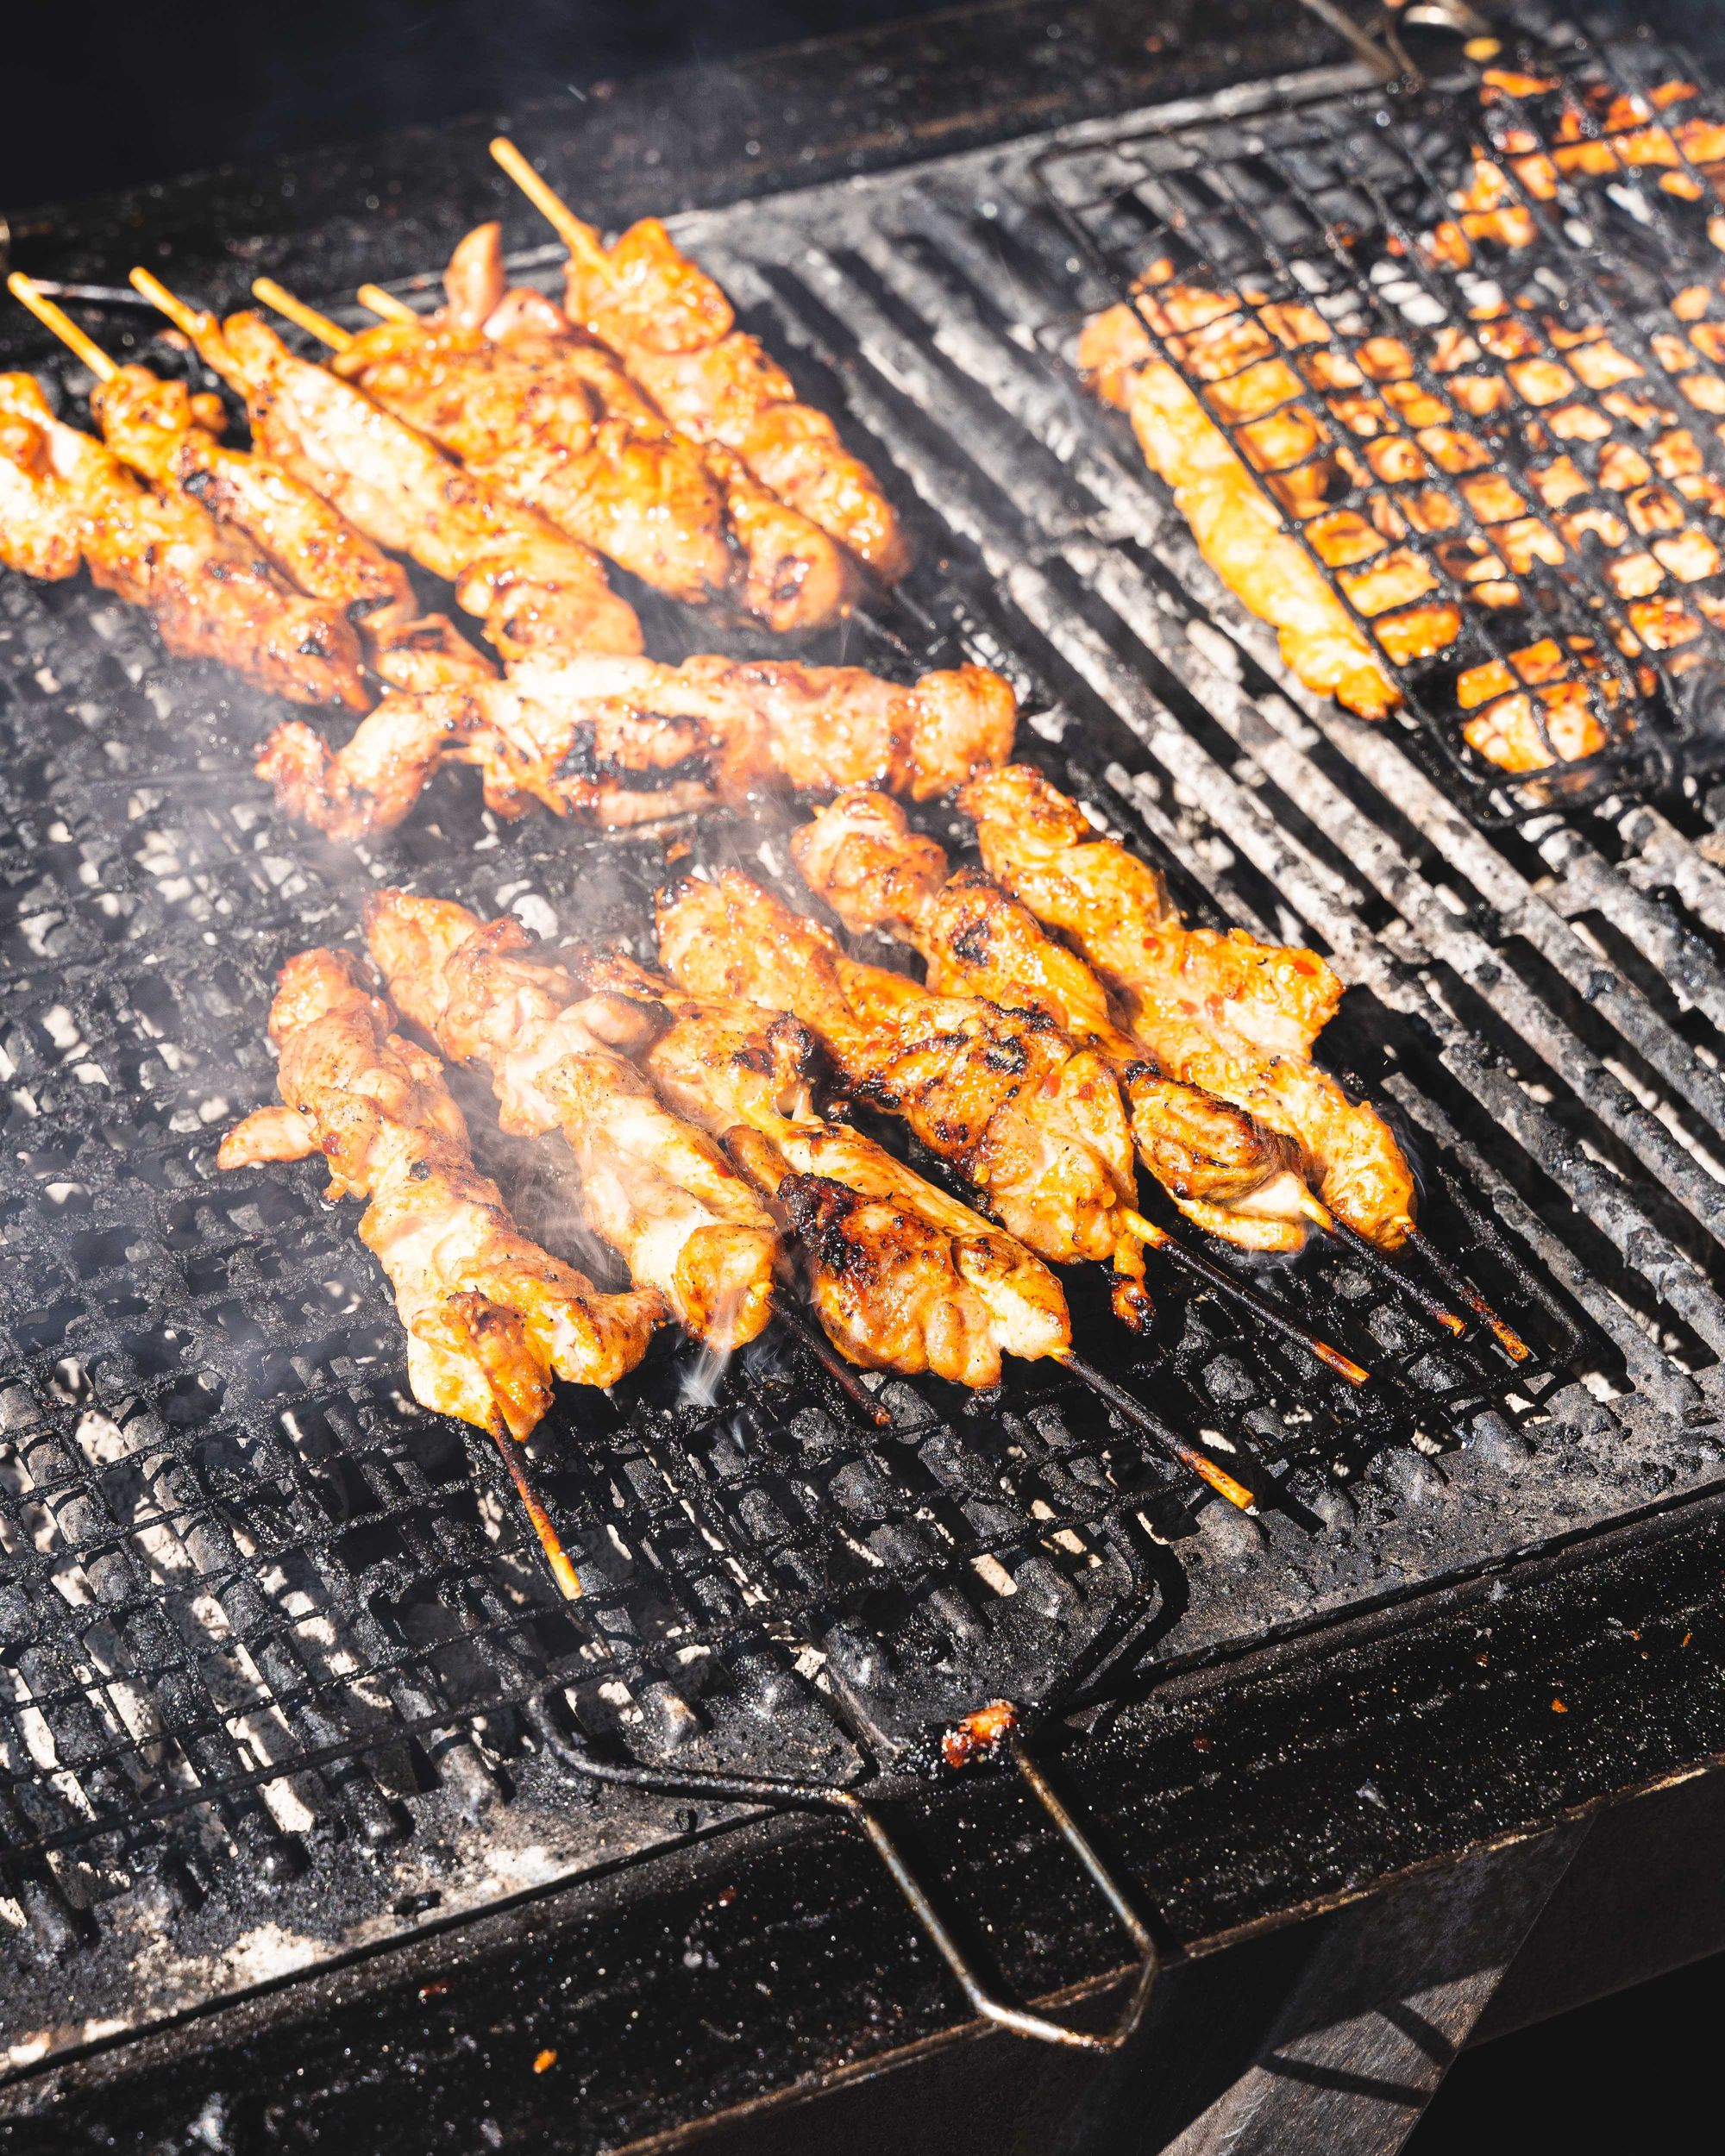 Chicken skewers grilling on a BBQ